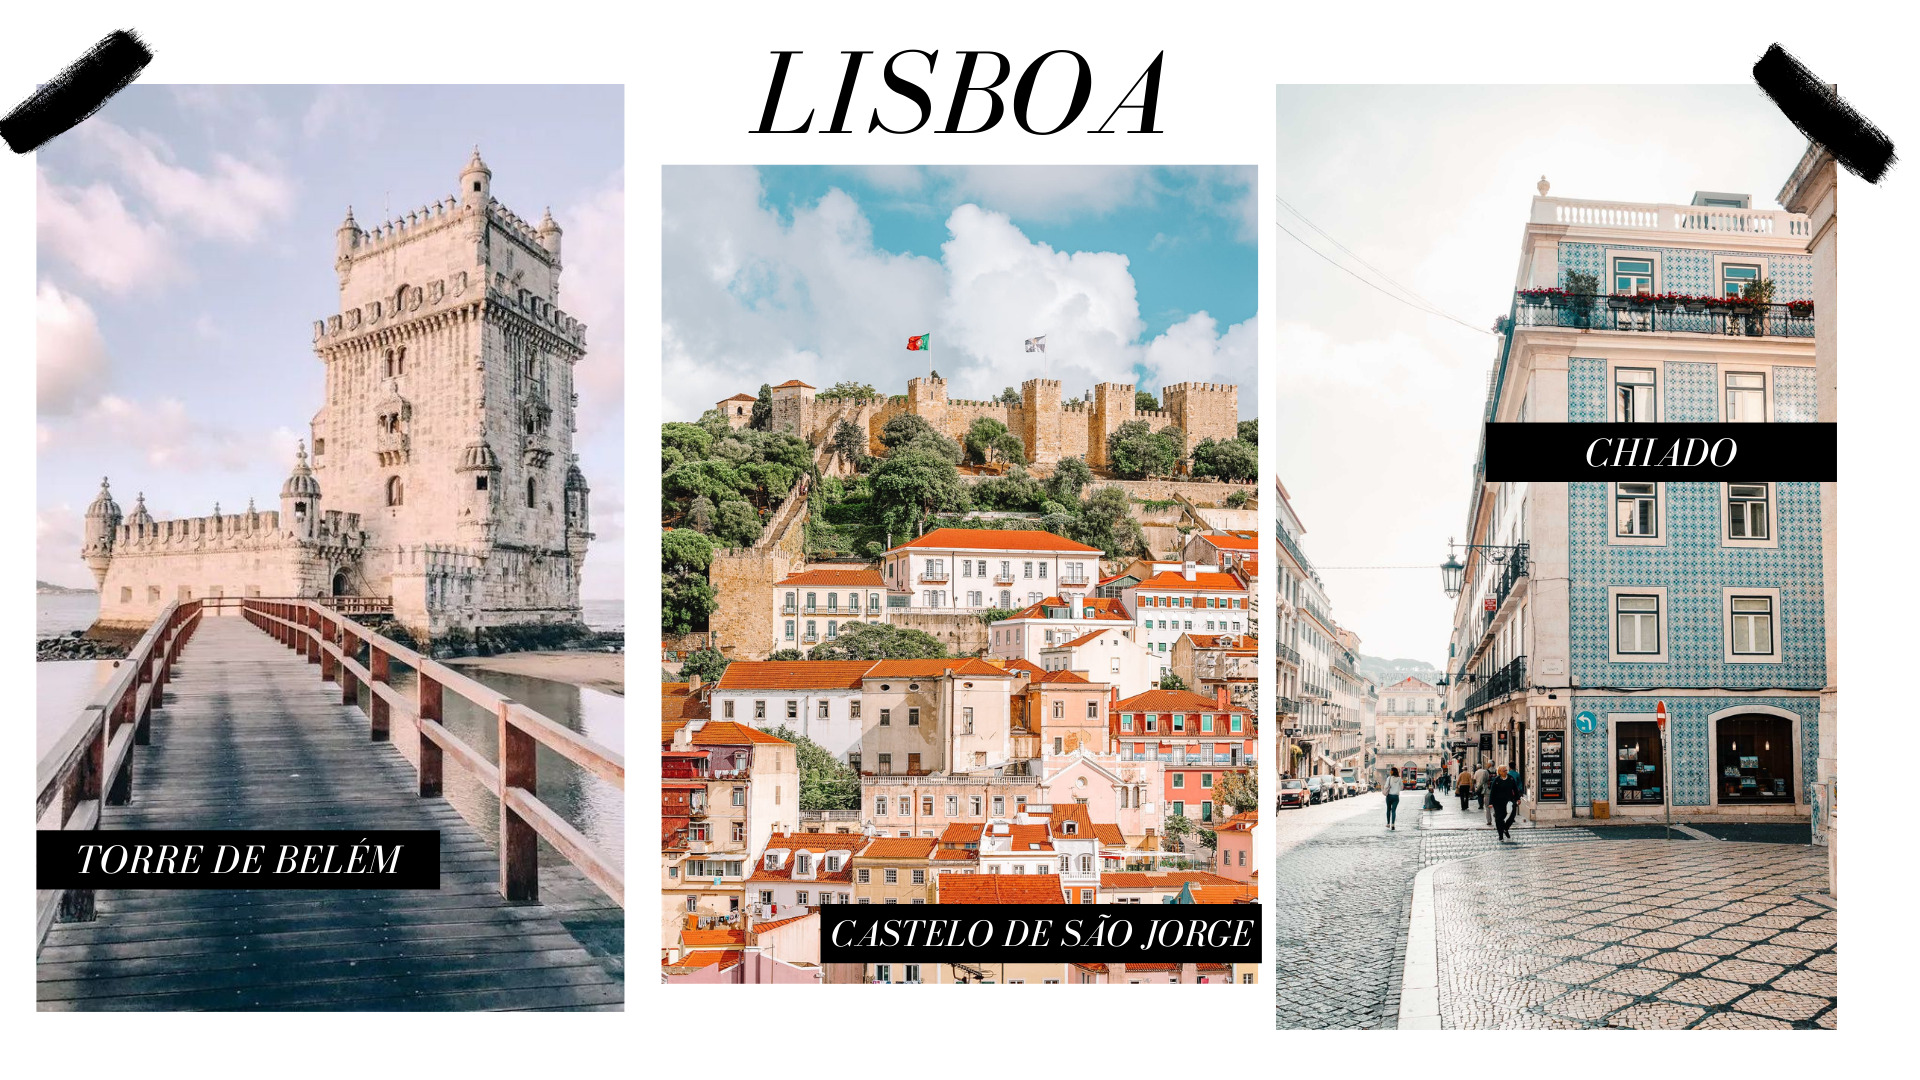 Portugal is a hidden treasure in Europe! It is by far the most complete and beautiful country! Here you will find an ultimate list of the 10 places you need to visit in Portugal!